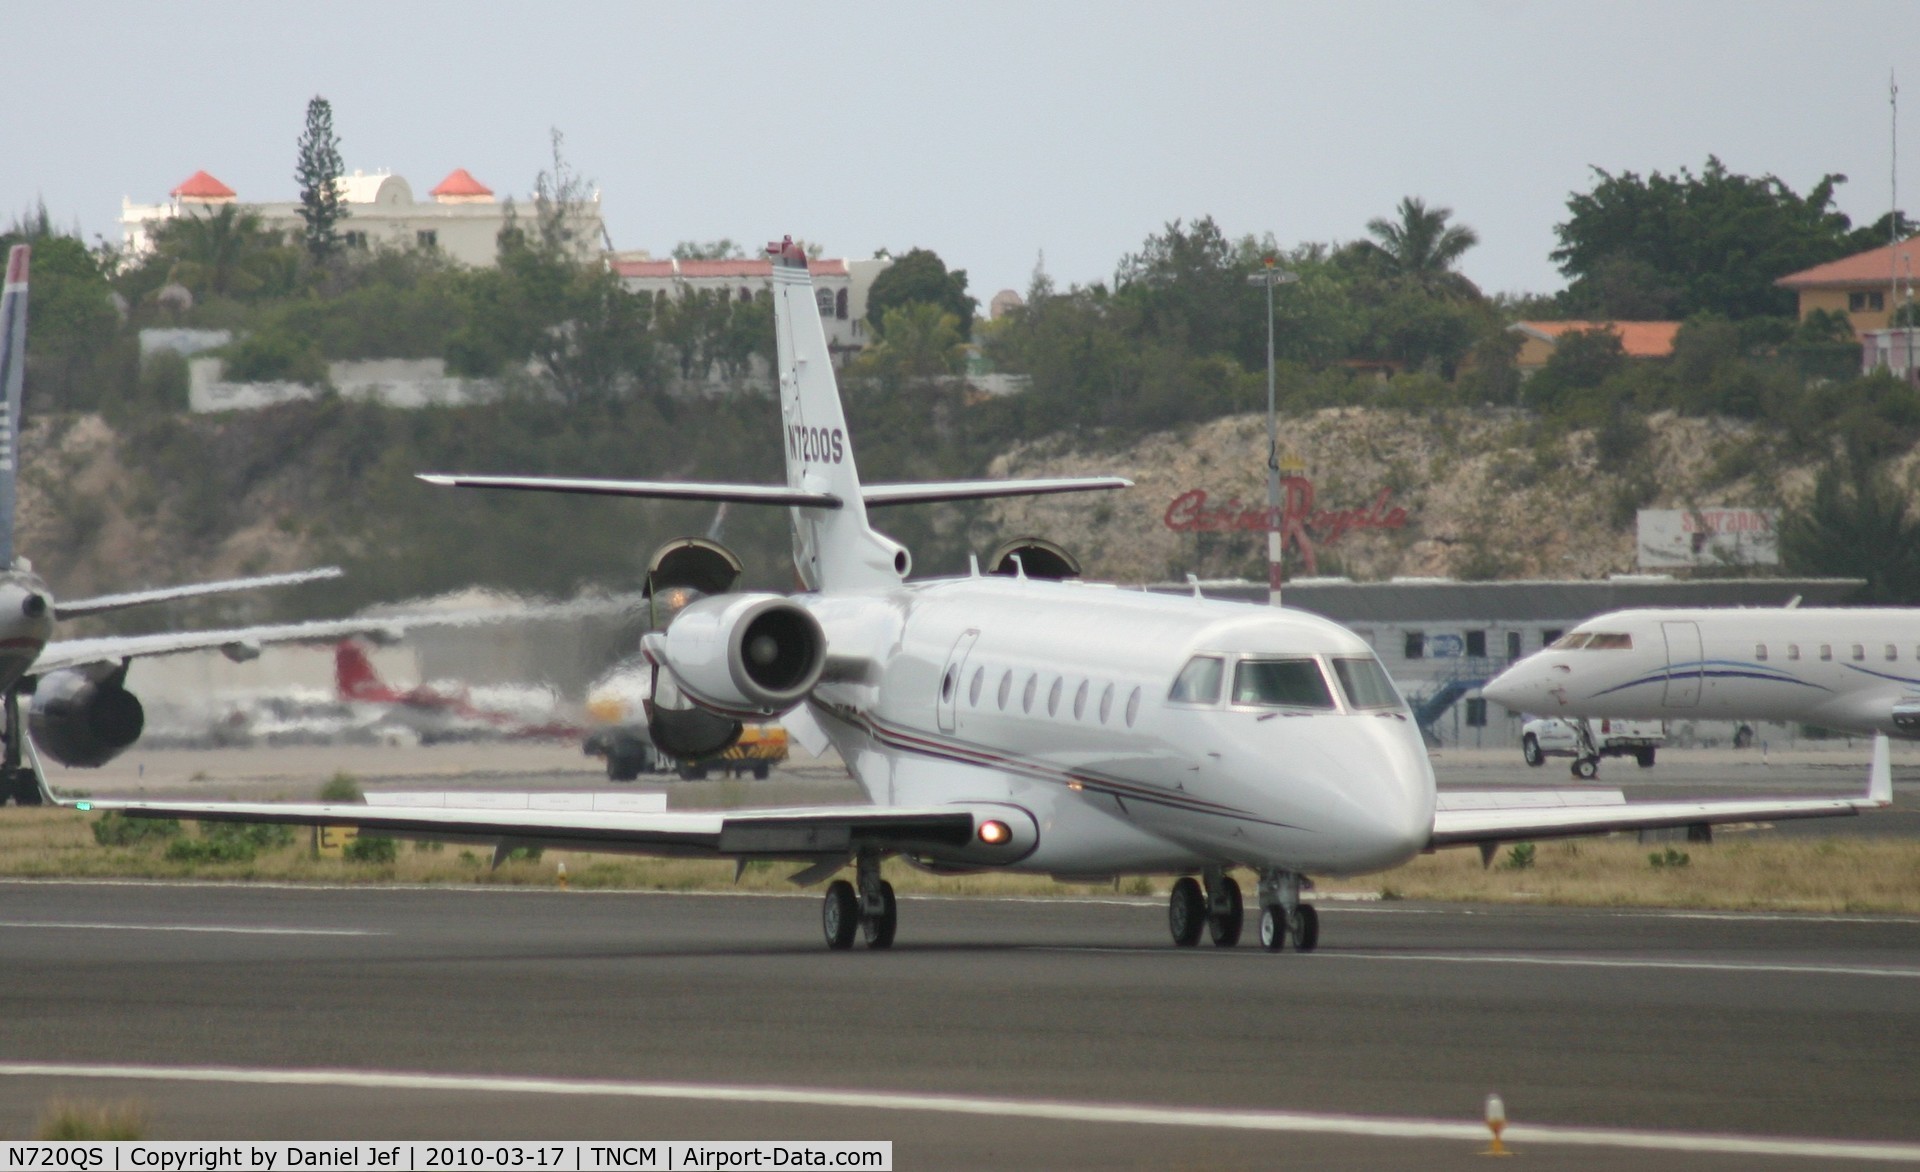 N720QS, 2003 Israel Aircraft Industries Gulfstream 200 C/N 085, N720QS just landed at TNCM and closing there ears